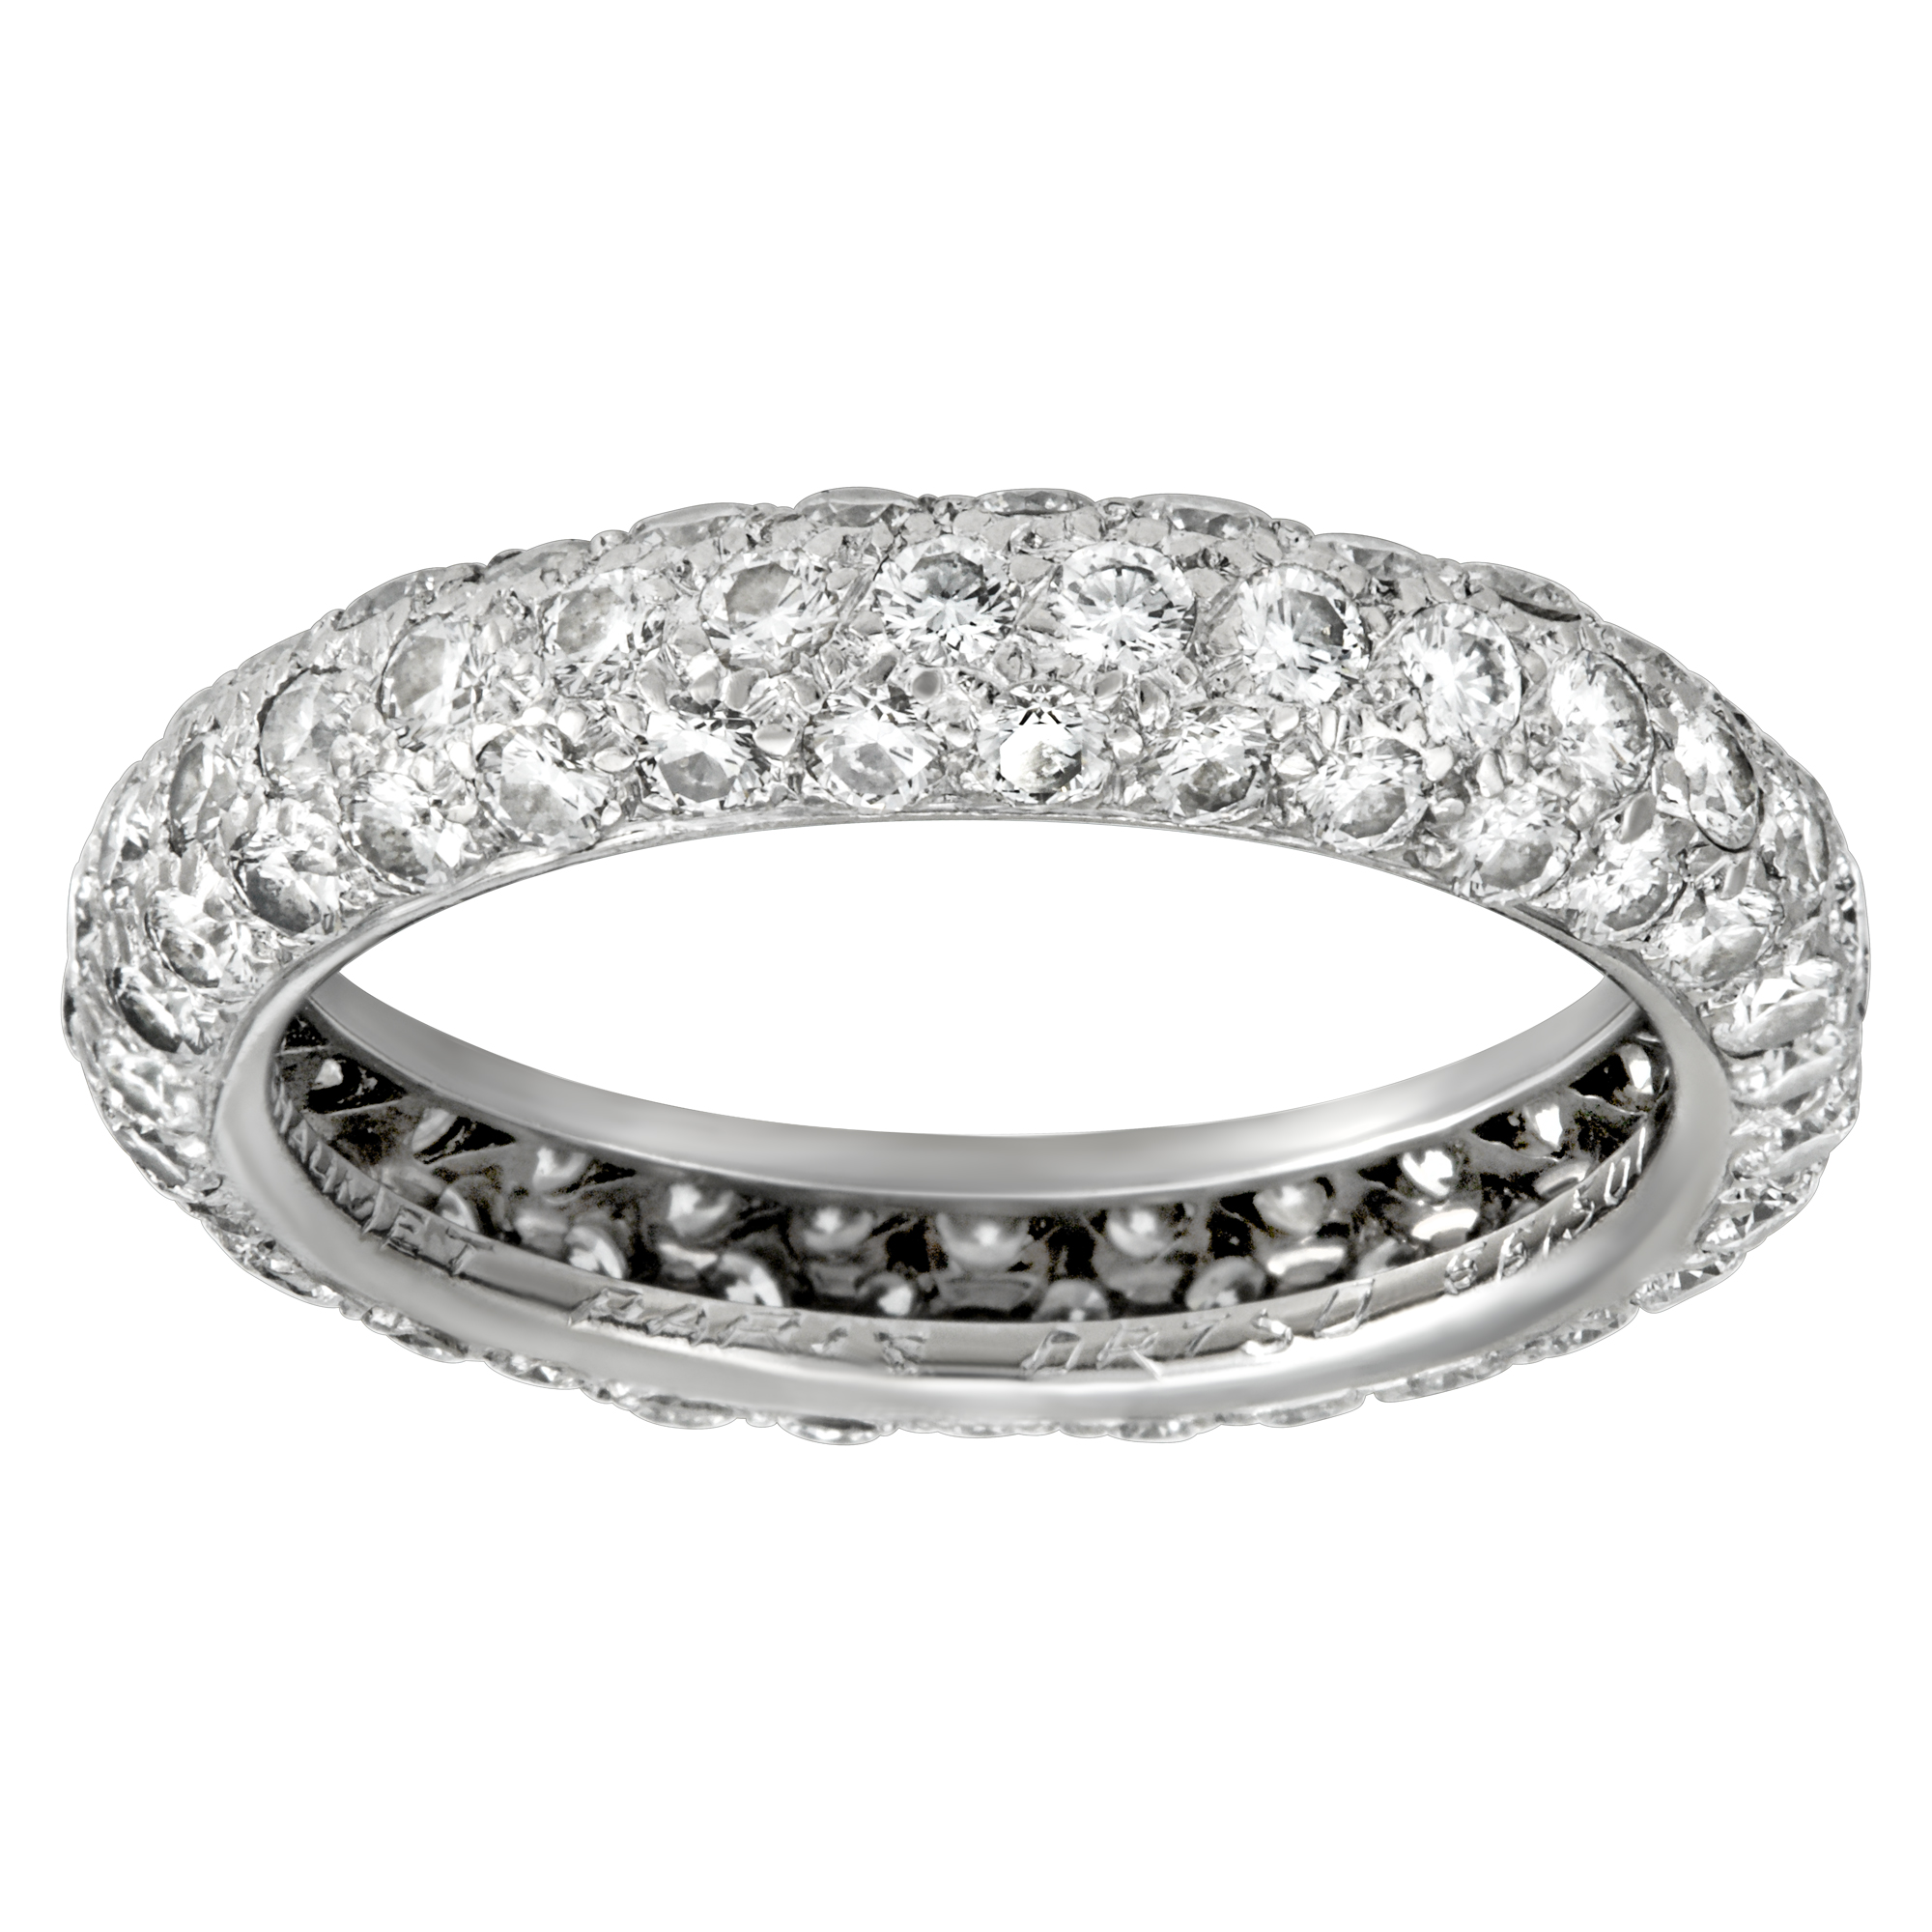 Chaumet  eternity diamond band in 18k white gold image 1